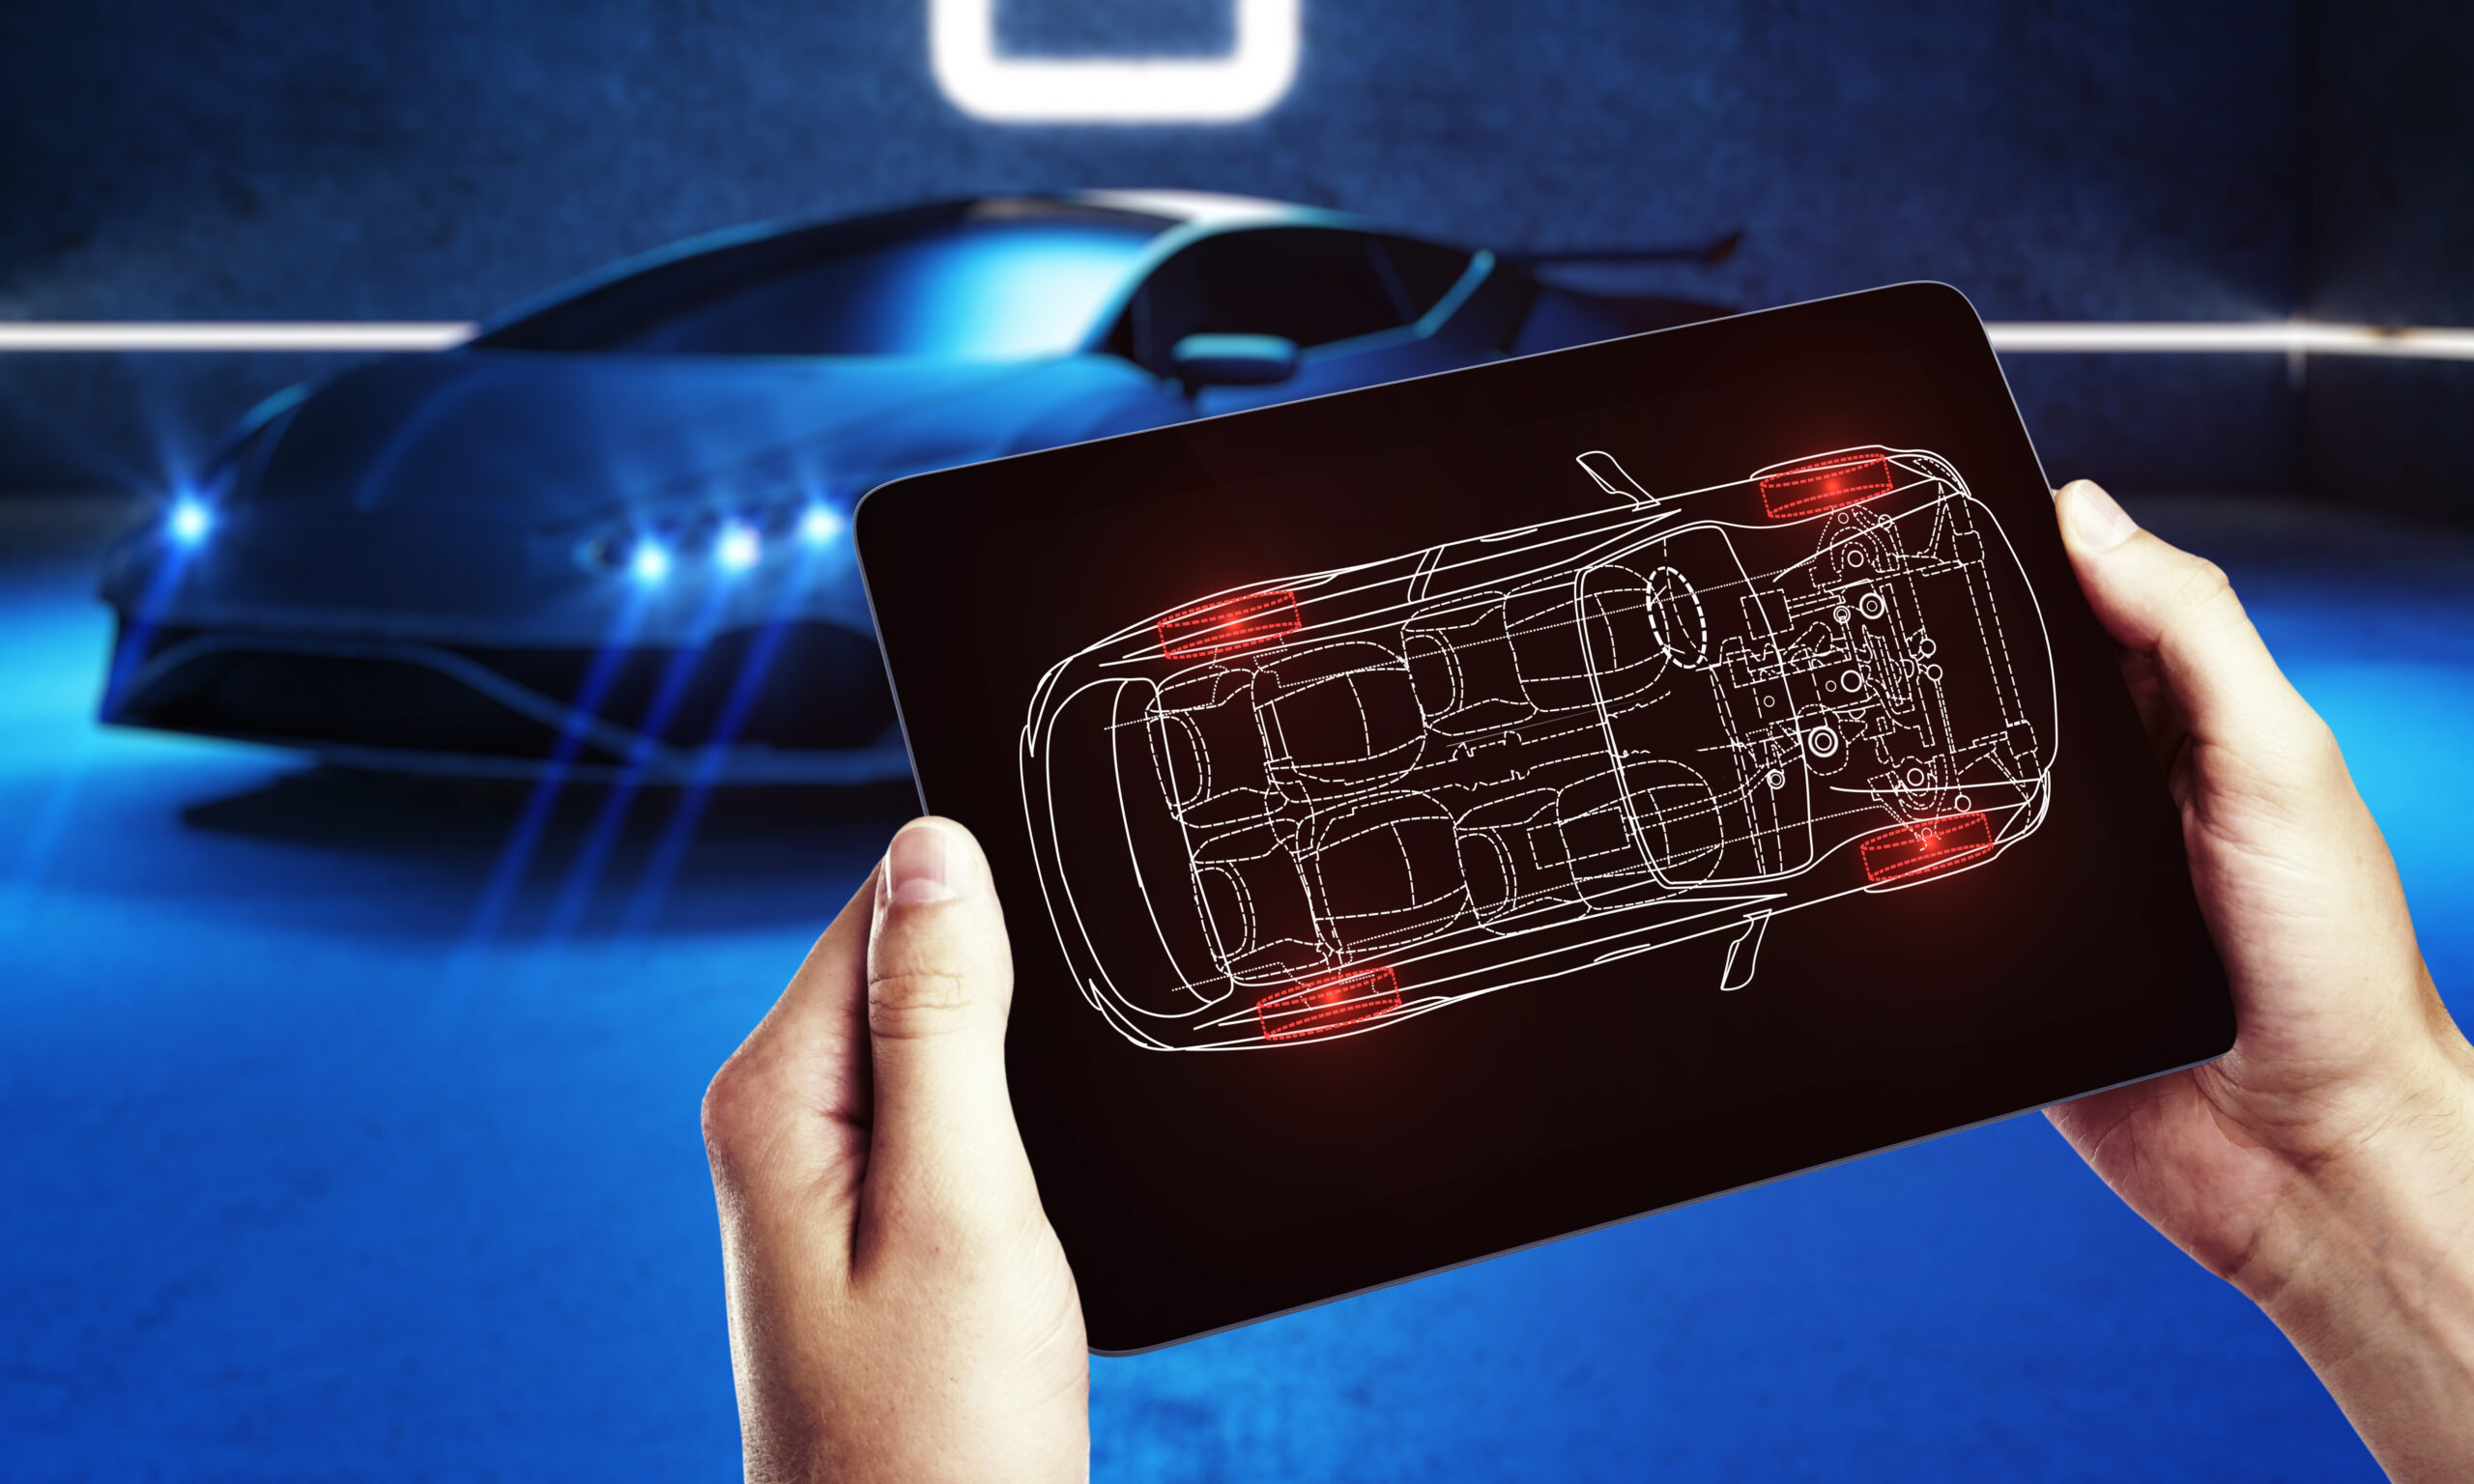 Hands holding a tablet displaying a schematic overlay of a car's internal systems with a futuristic vehicle illuminated in the background, symbolizing advanced transport diagnostics technology.